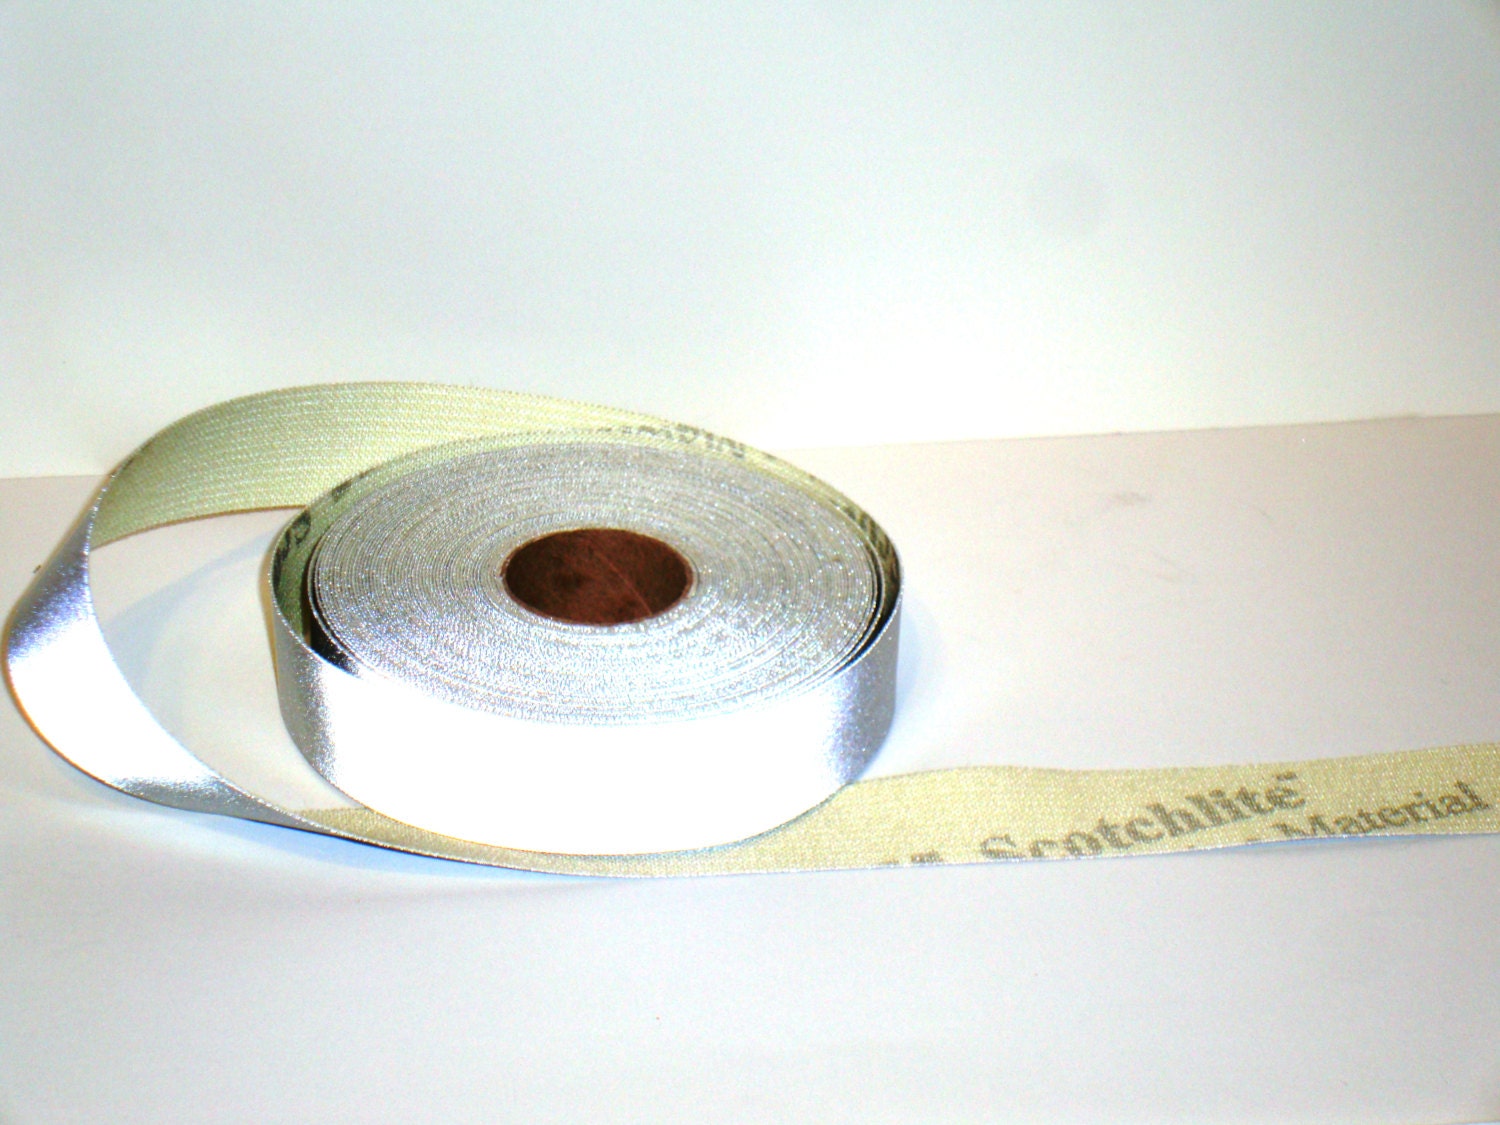 3M Scotchlite Silver Reflective Fabric Sewing Tape 1 Yard or 1